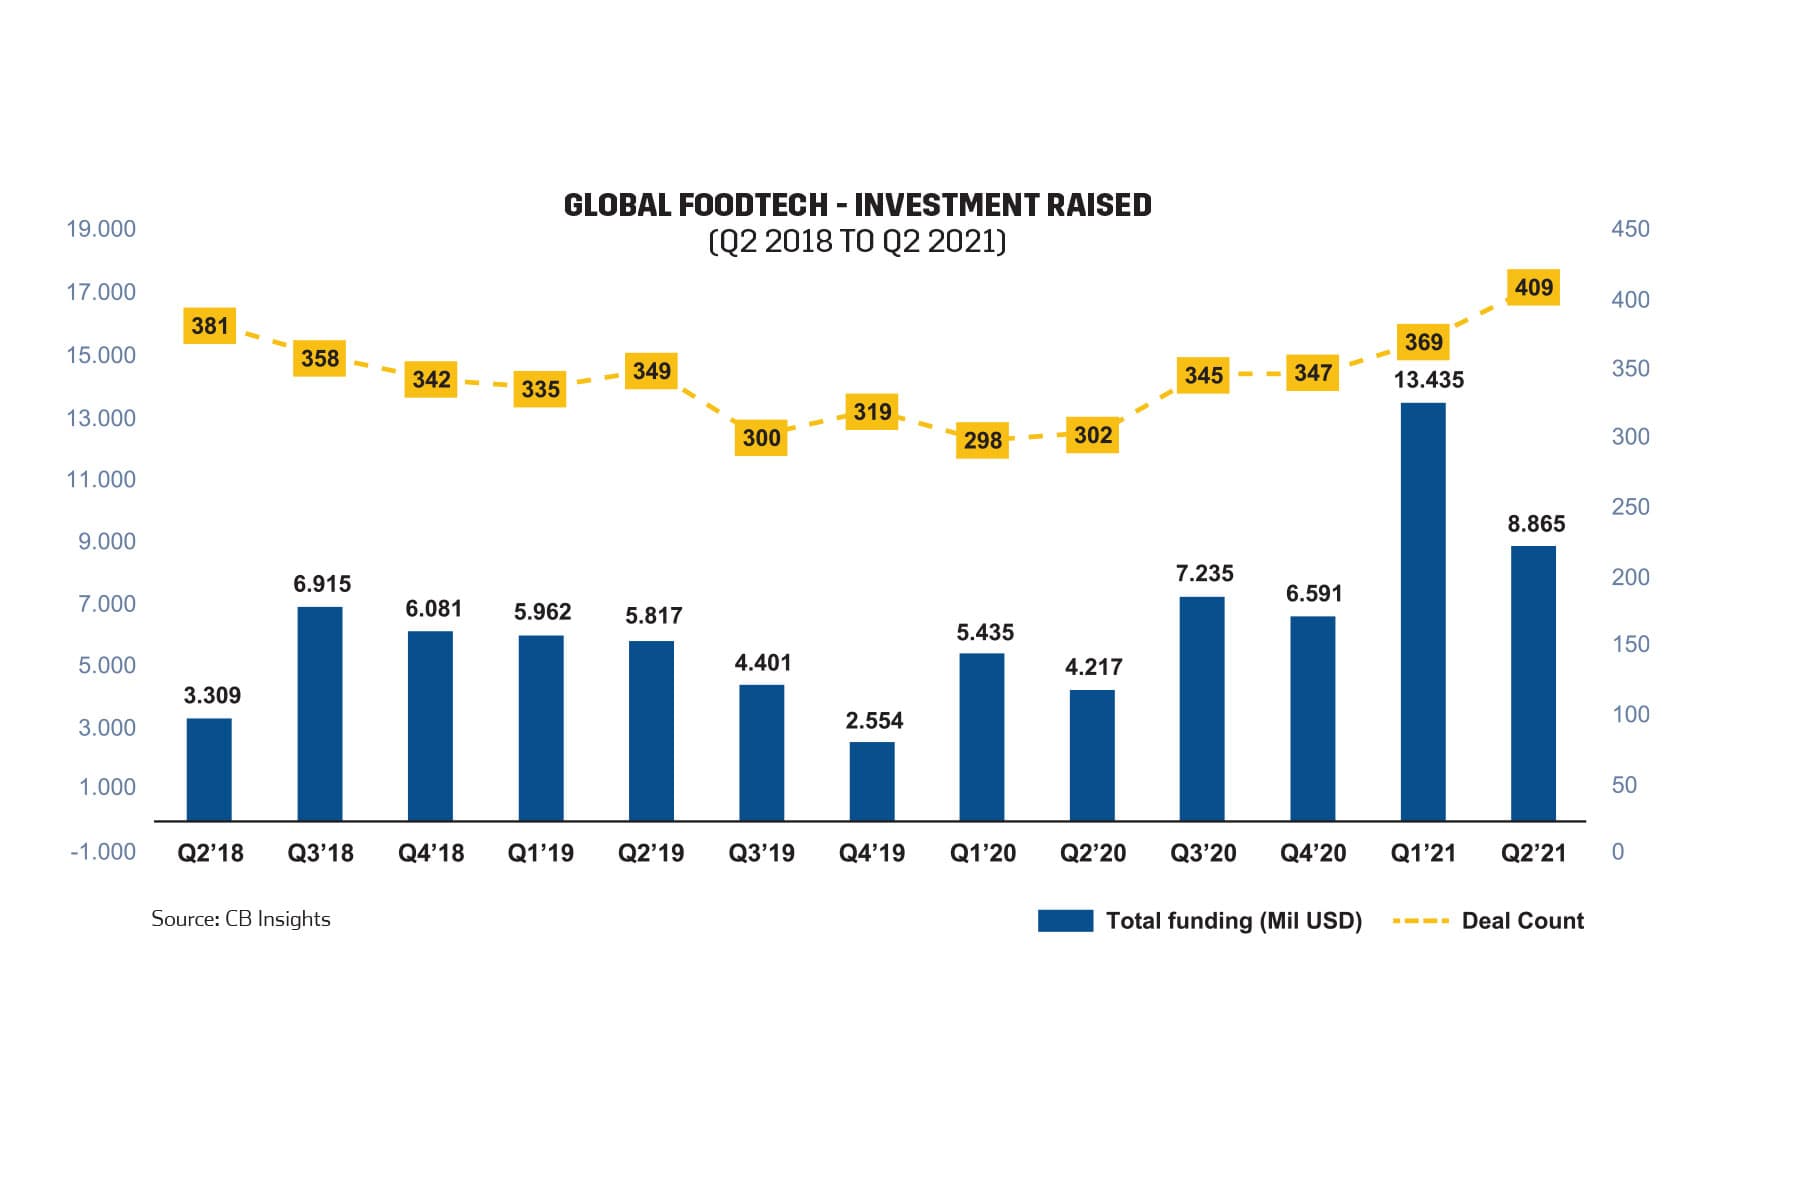 Global Foodtech - Investment Raised